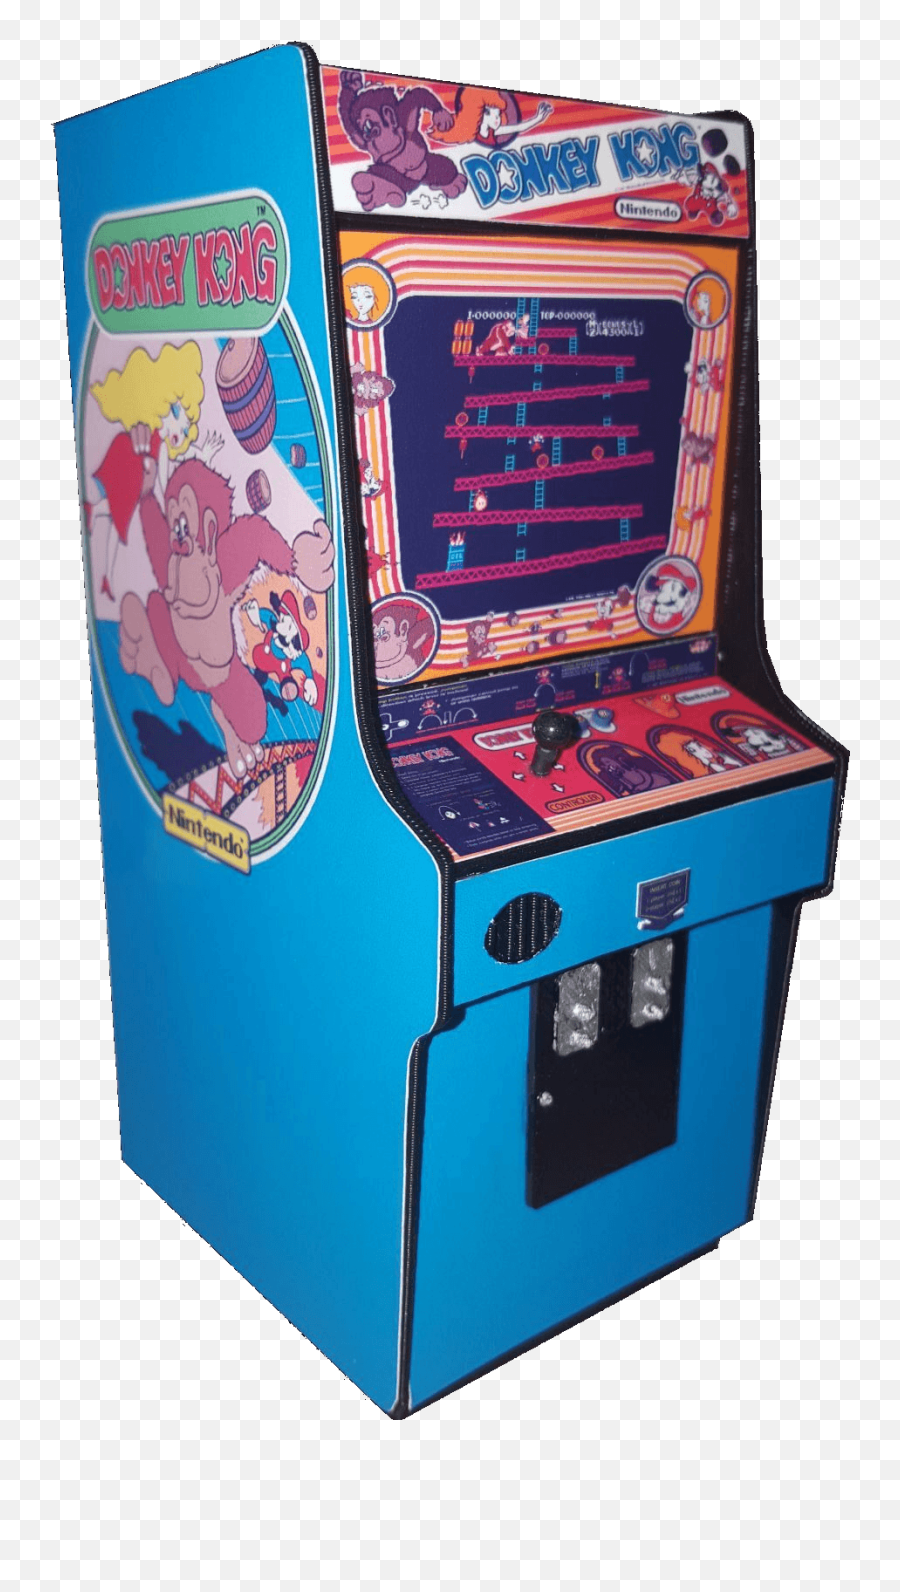 Donkey Kong - Vg Legacy 1981 Arcade Game Developed By Nintendo Donkey Kong Arcade Game Png,Arcade Machine Png